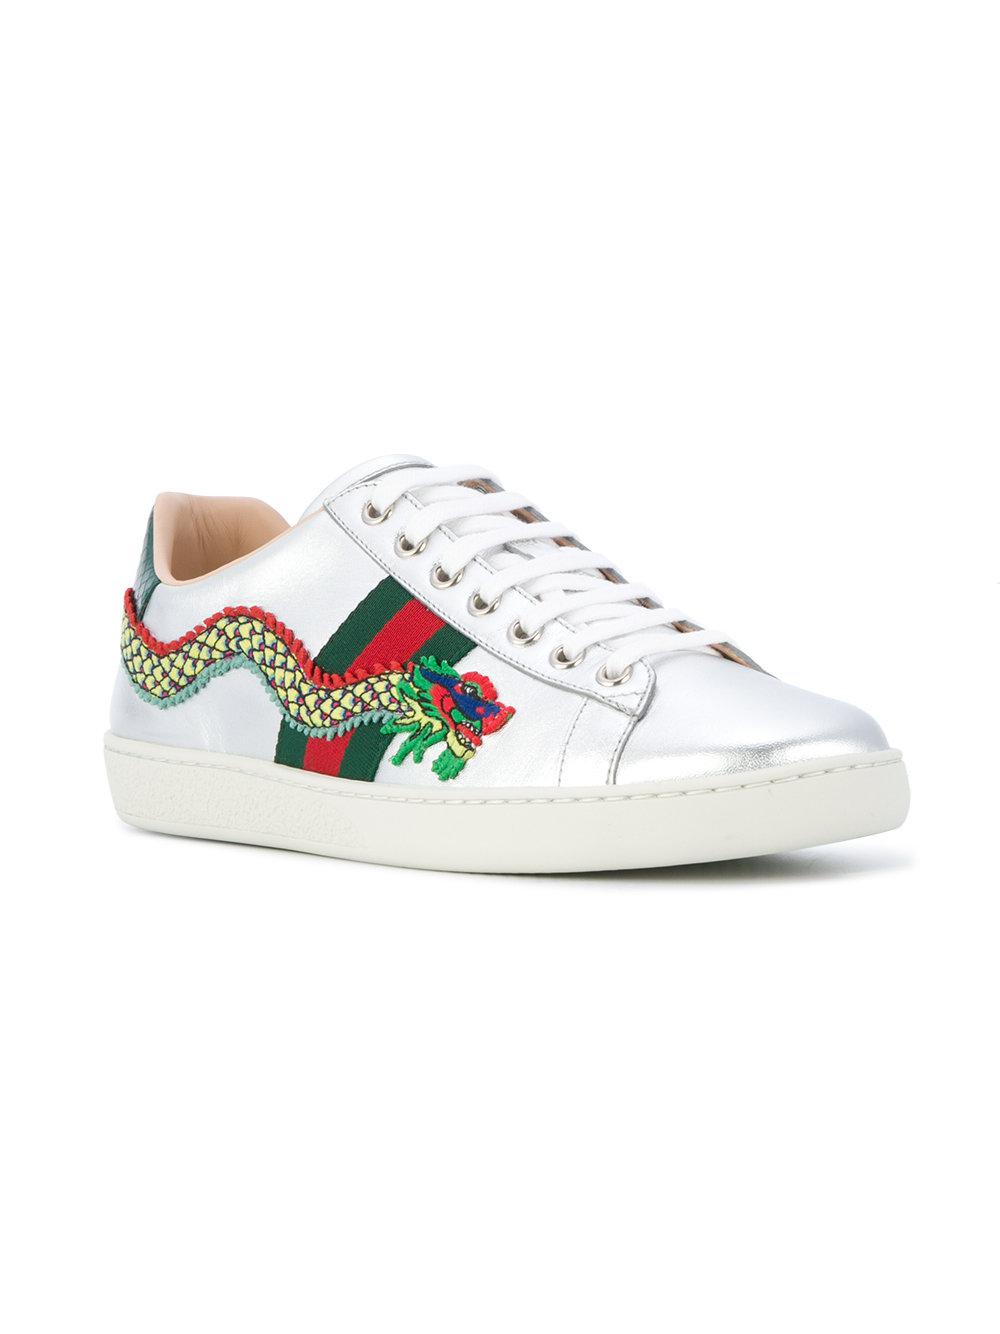 Gucci Leather Ace Dragon Embroidered Sneakers in Metallic | Lyst